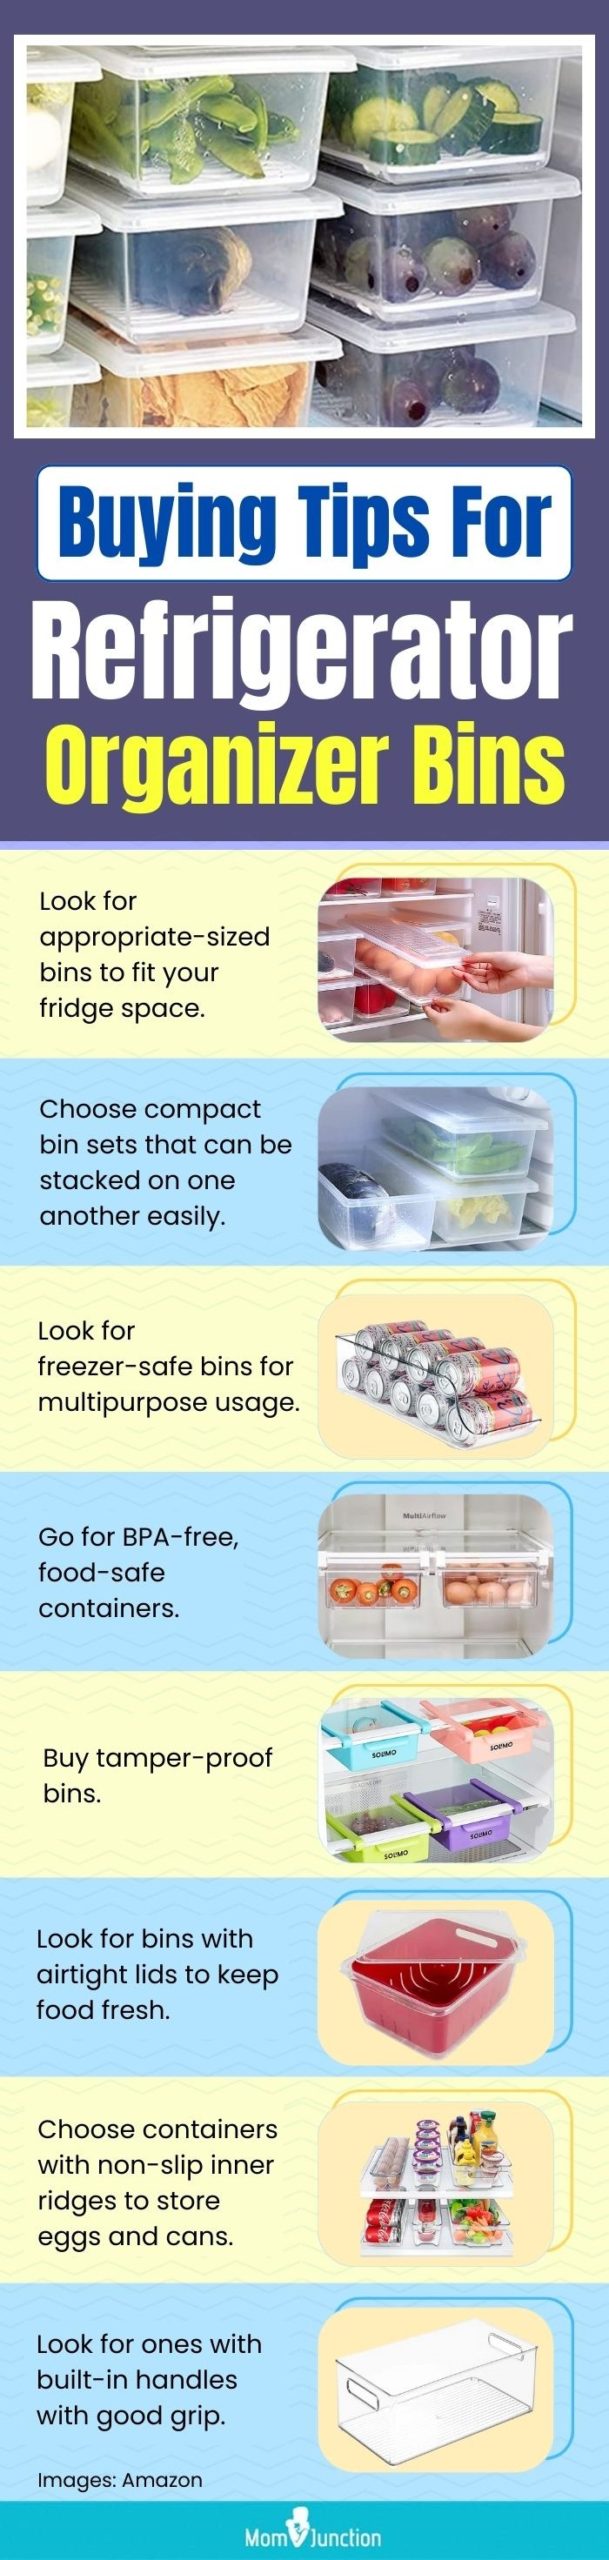 YouCopia Fridge & Freezer Organizers: A Fresh Look for Your Refrigerator